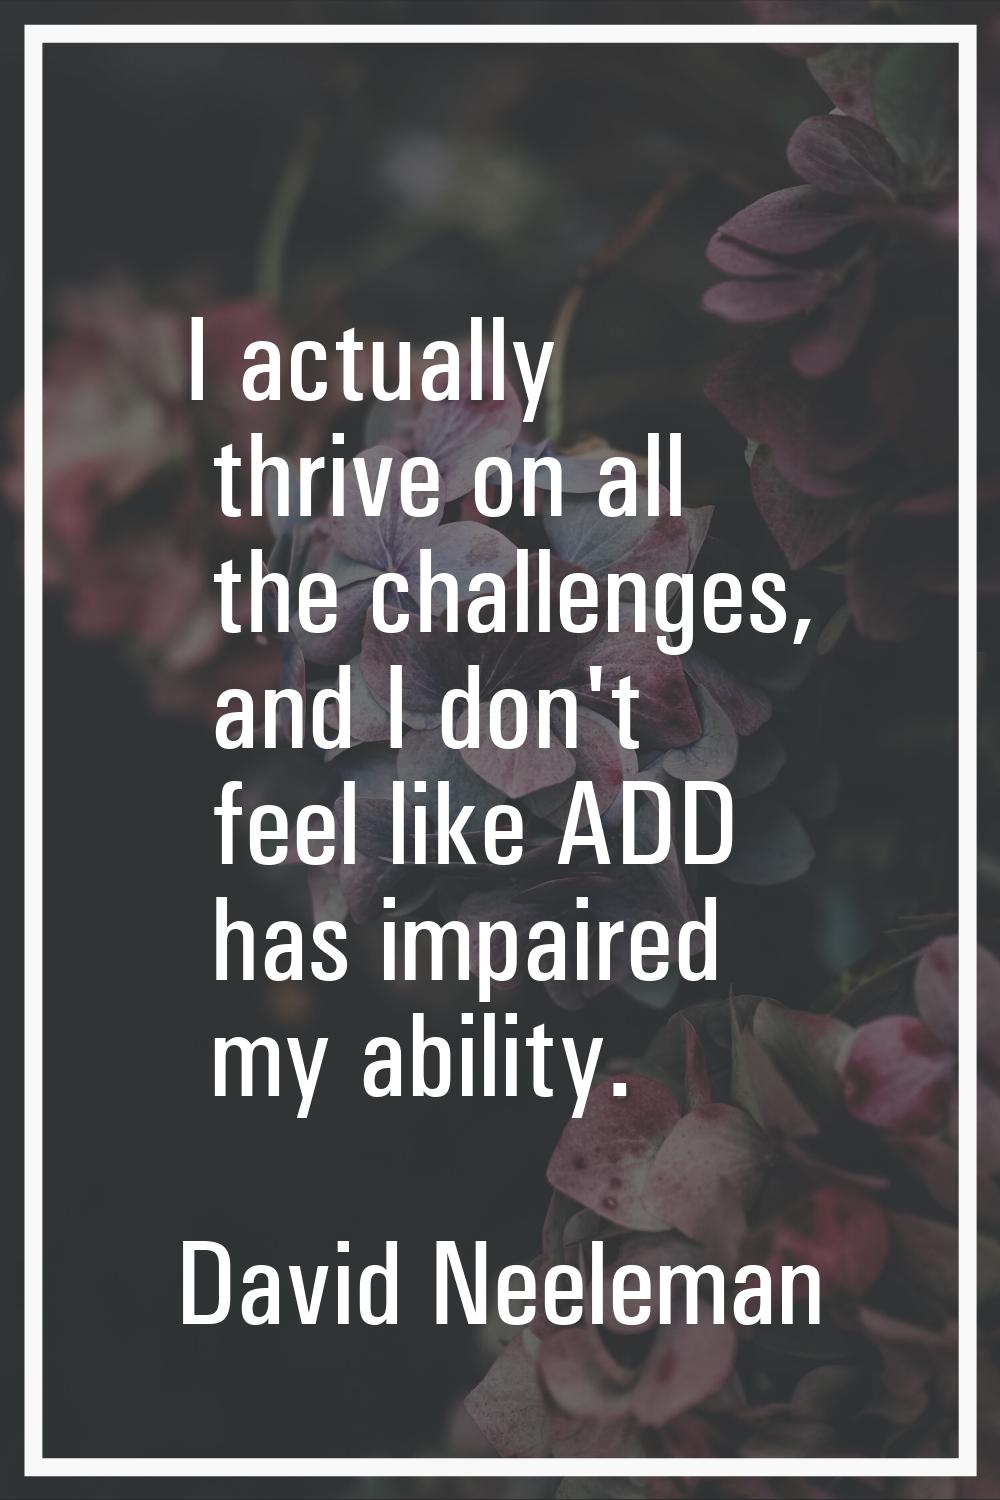 I actually thrive on all the challenges, and I don't feel like ADD has impaired my ability.